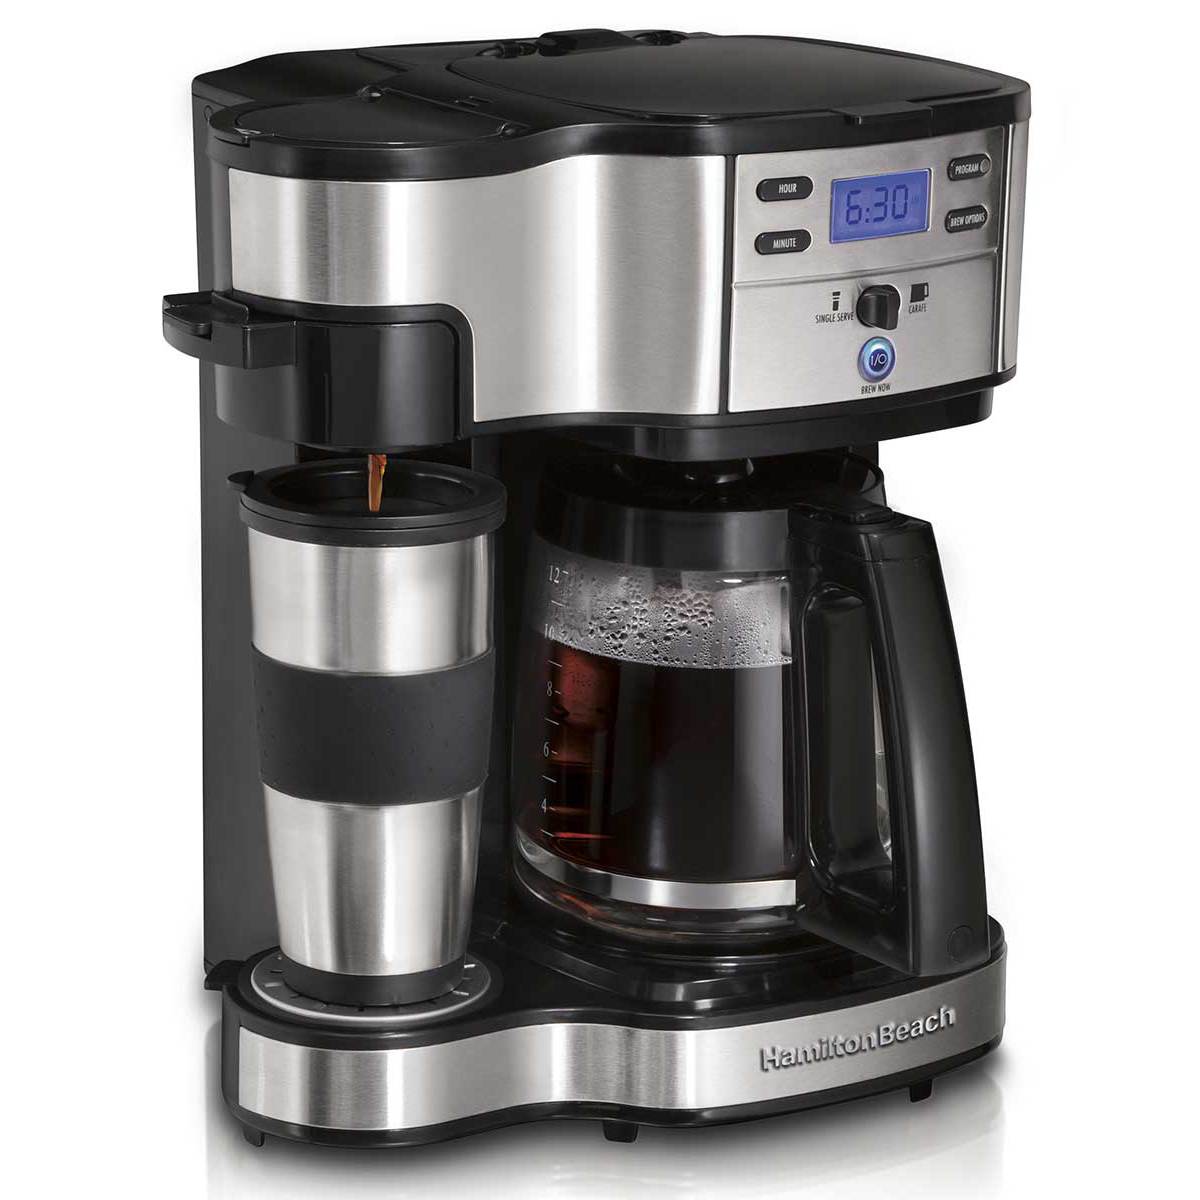 2-Way Coffee Maker, Single-Serve &12 Cup Carafe, Stainless (49980R)